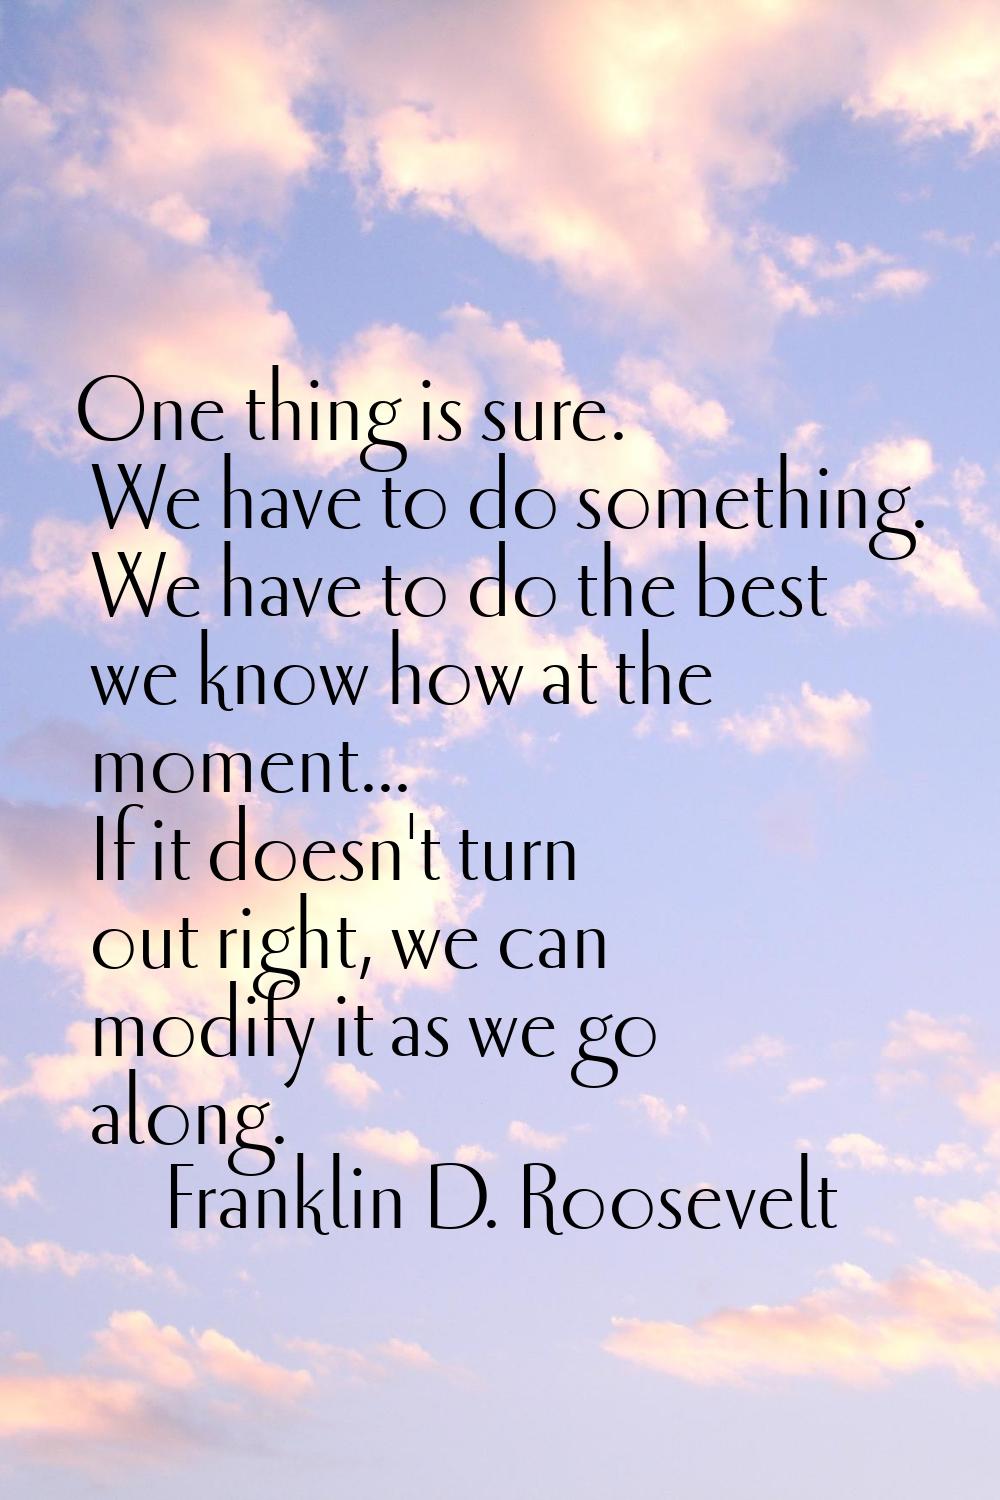 One thing is sure. We have to do something. We have to do the best we know how at the moment... If 